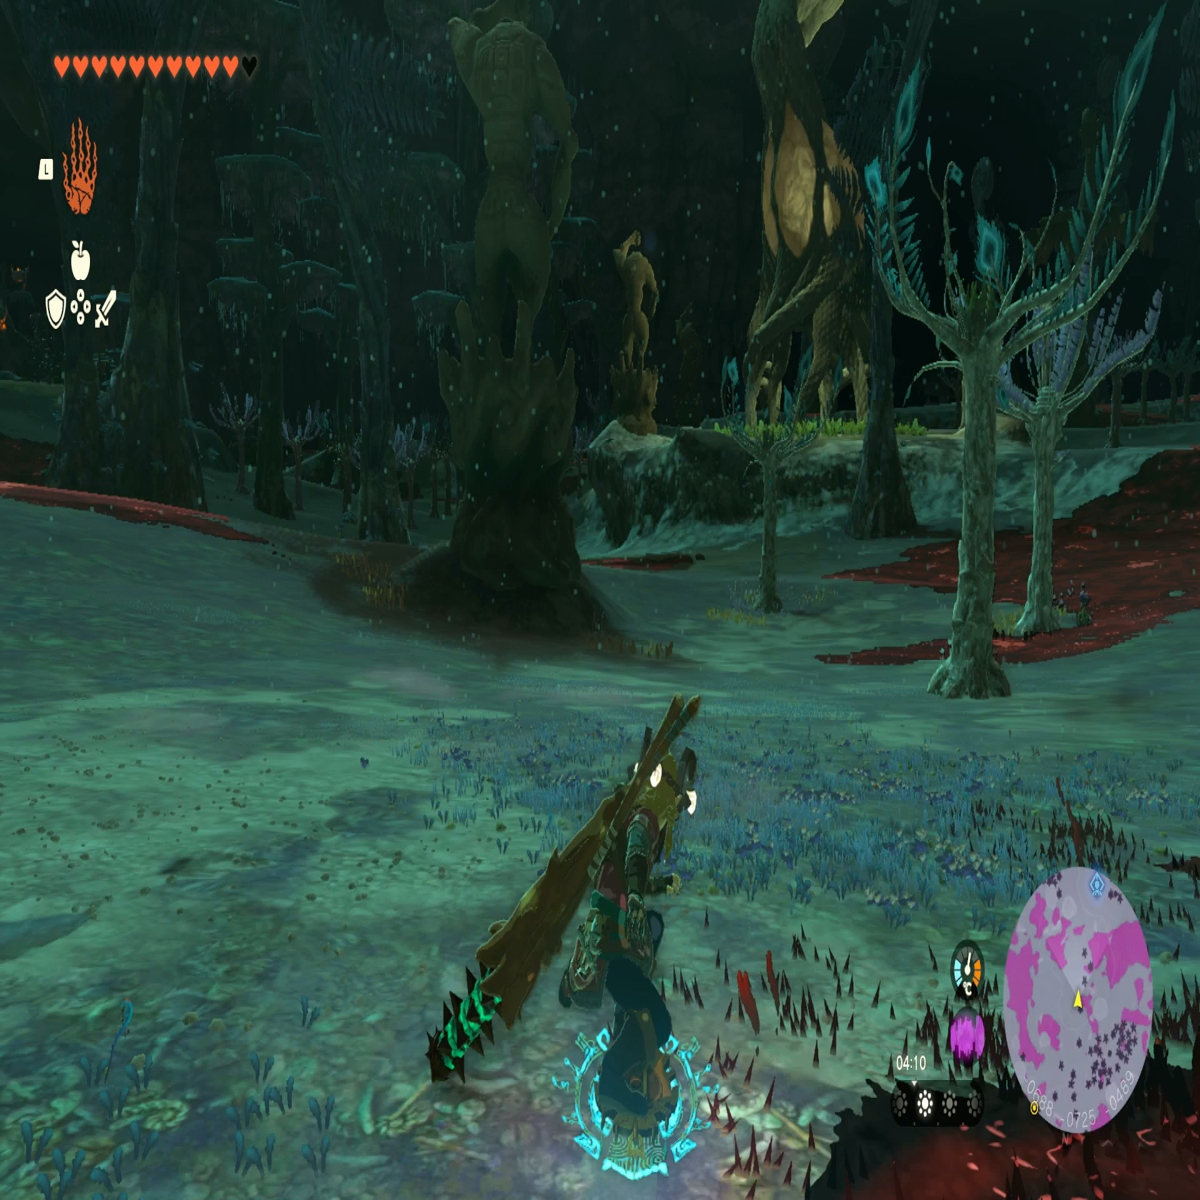 OK, did anyone else find this quest really weird? Like that Zora